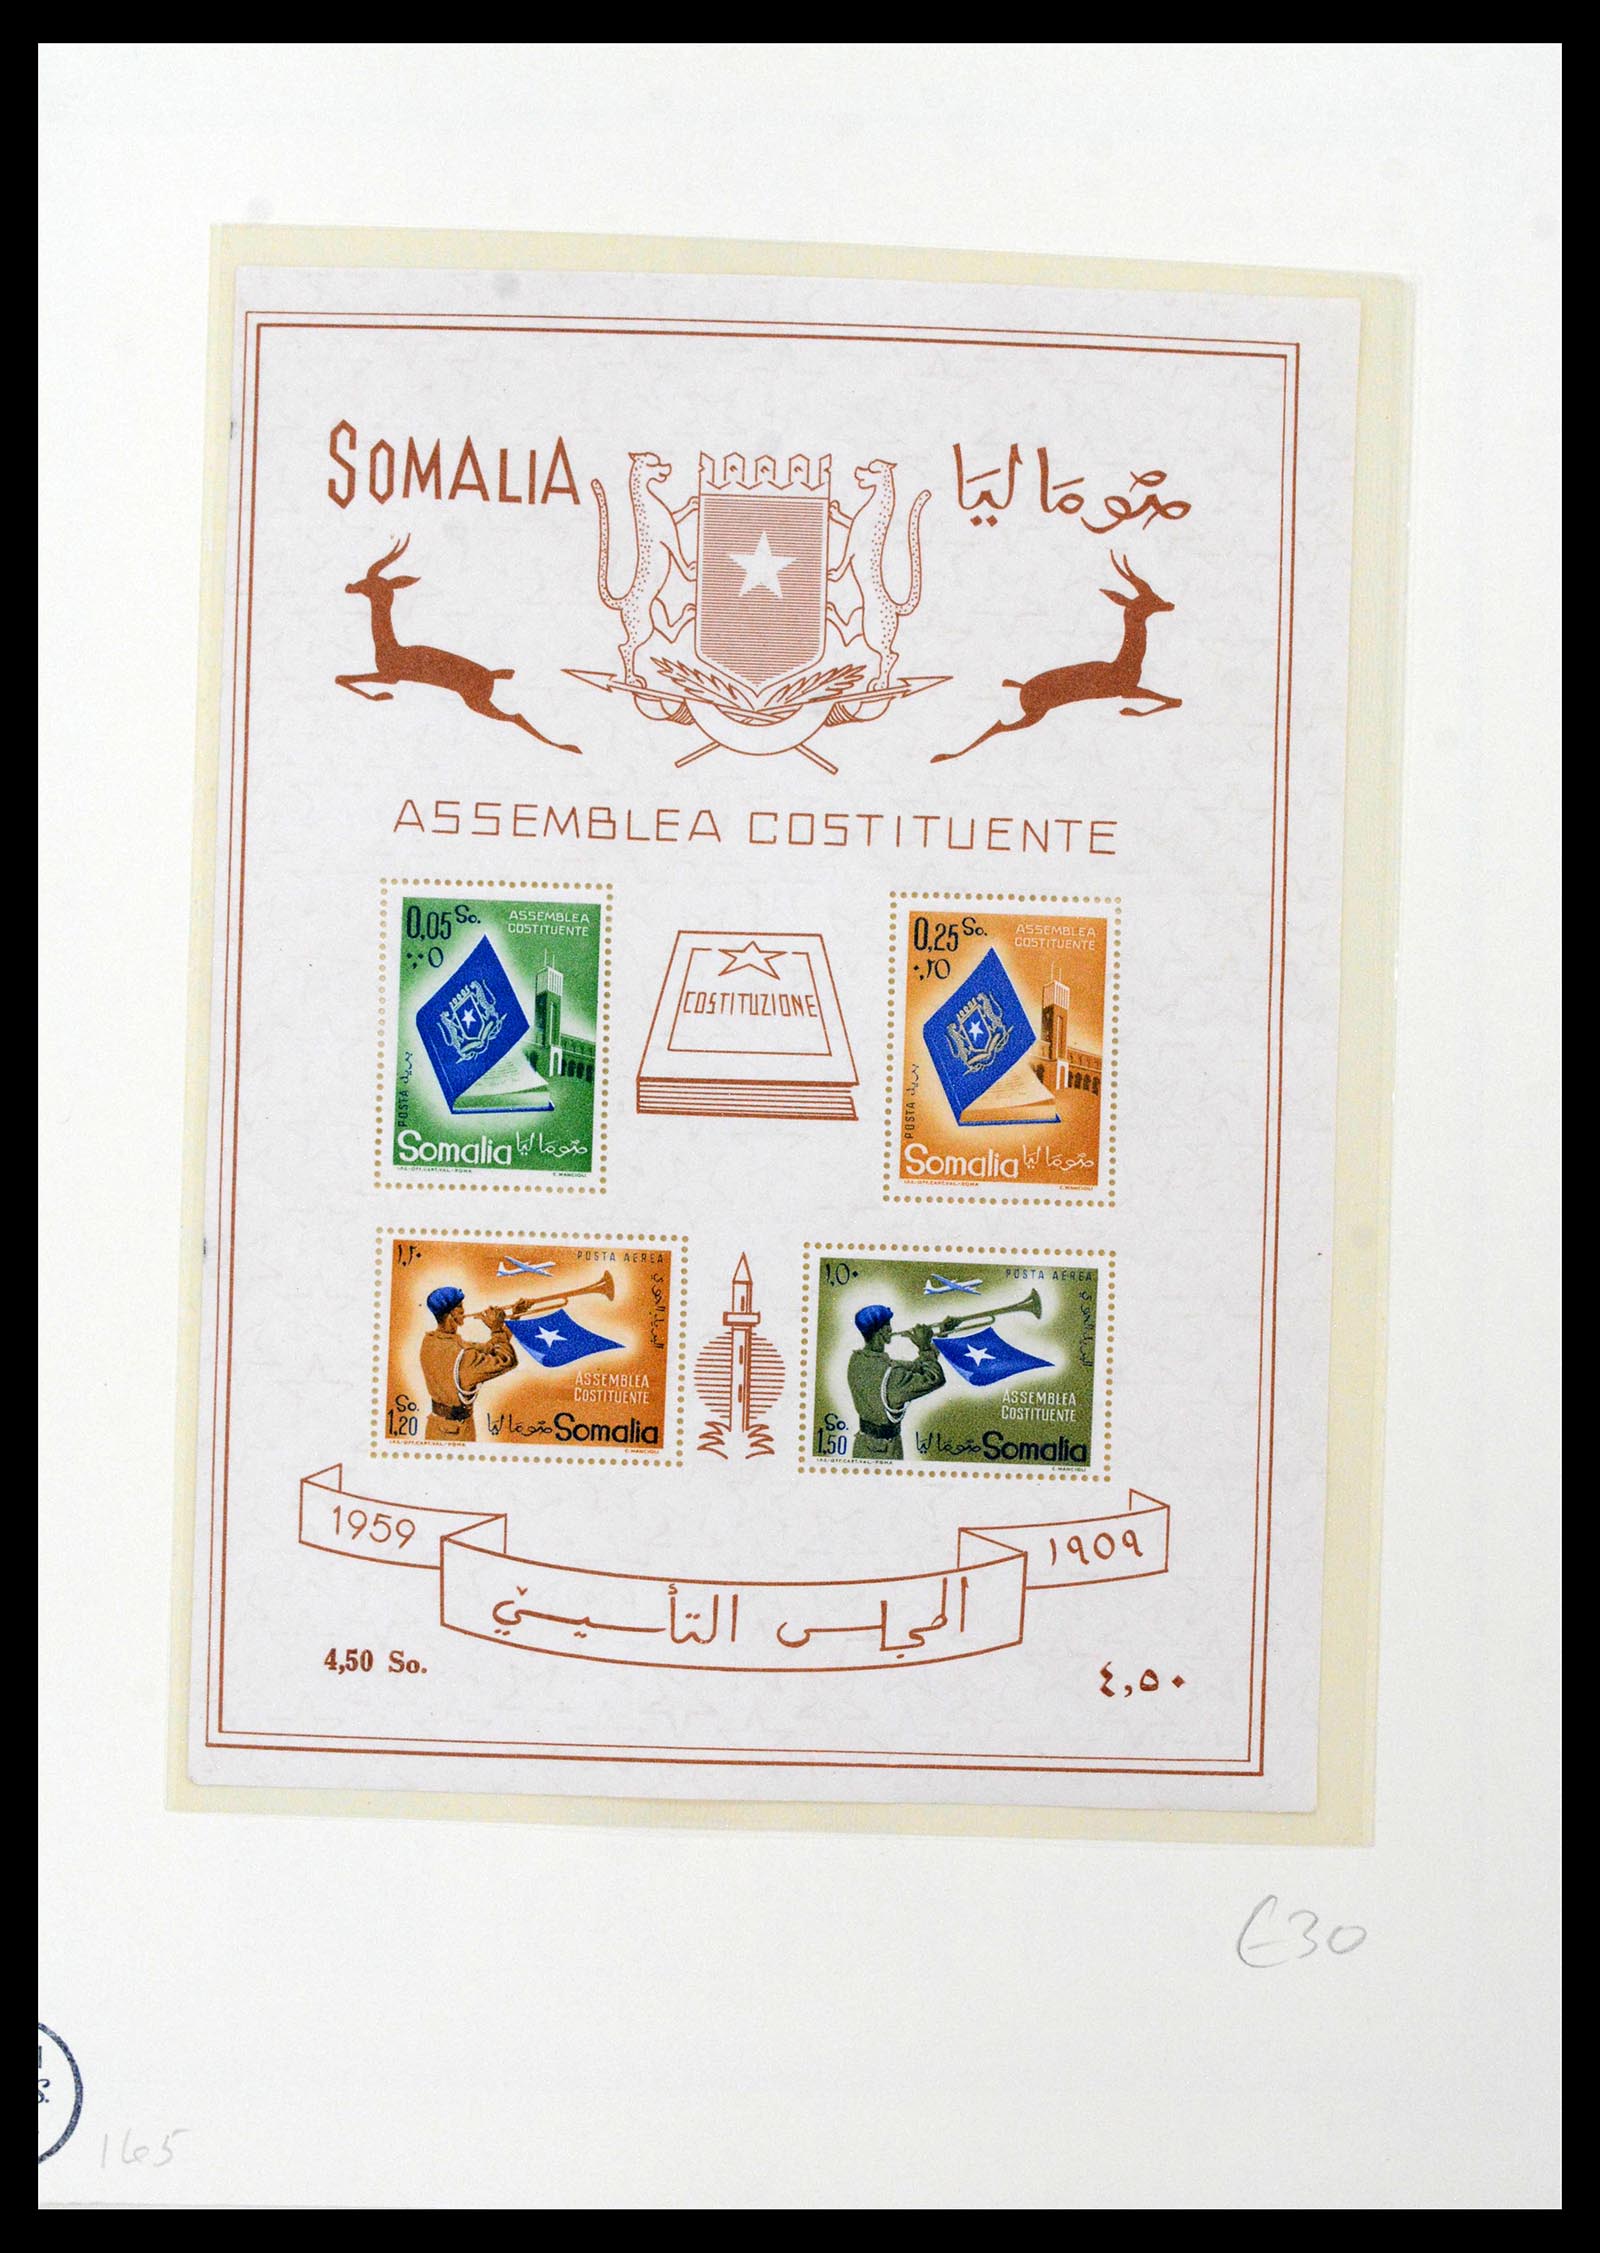 39011 0023 - Stamp collection 39011 Somalia complete 1903-1960.